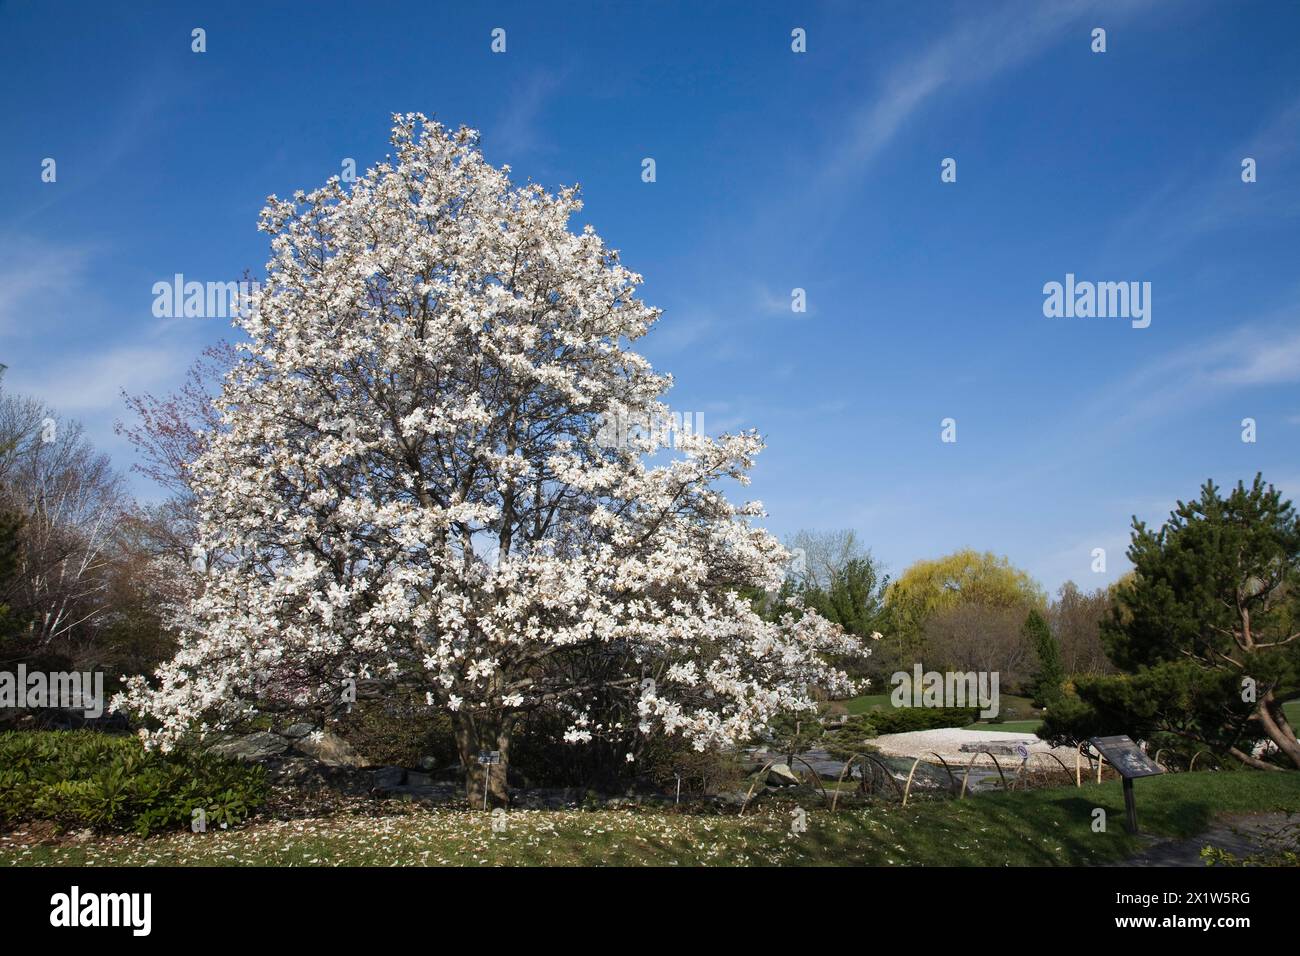 Magnolia loebneri tree with white flower blossoms in full bloom in Japanese garden in spring, Montreal Botanical Garden, Quebec, Canada Stock Photo